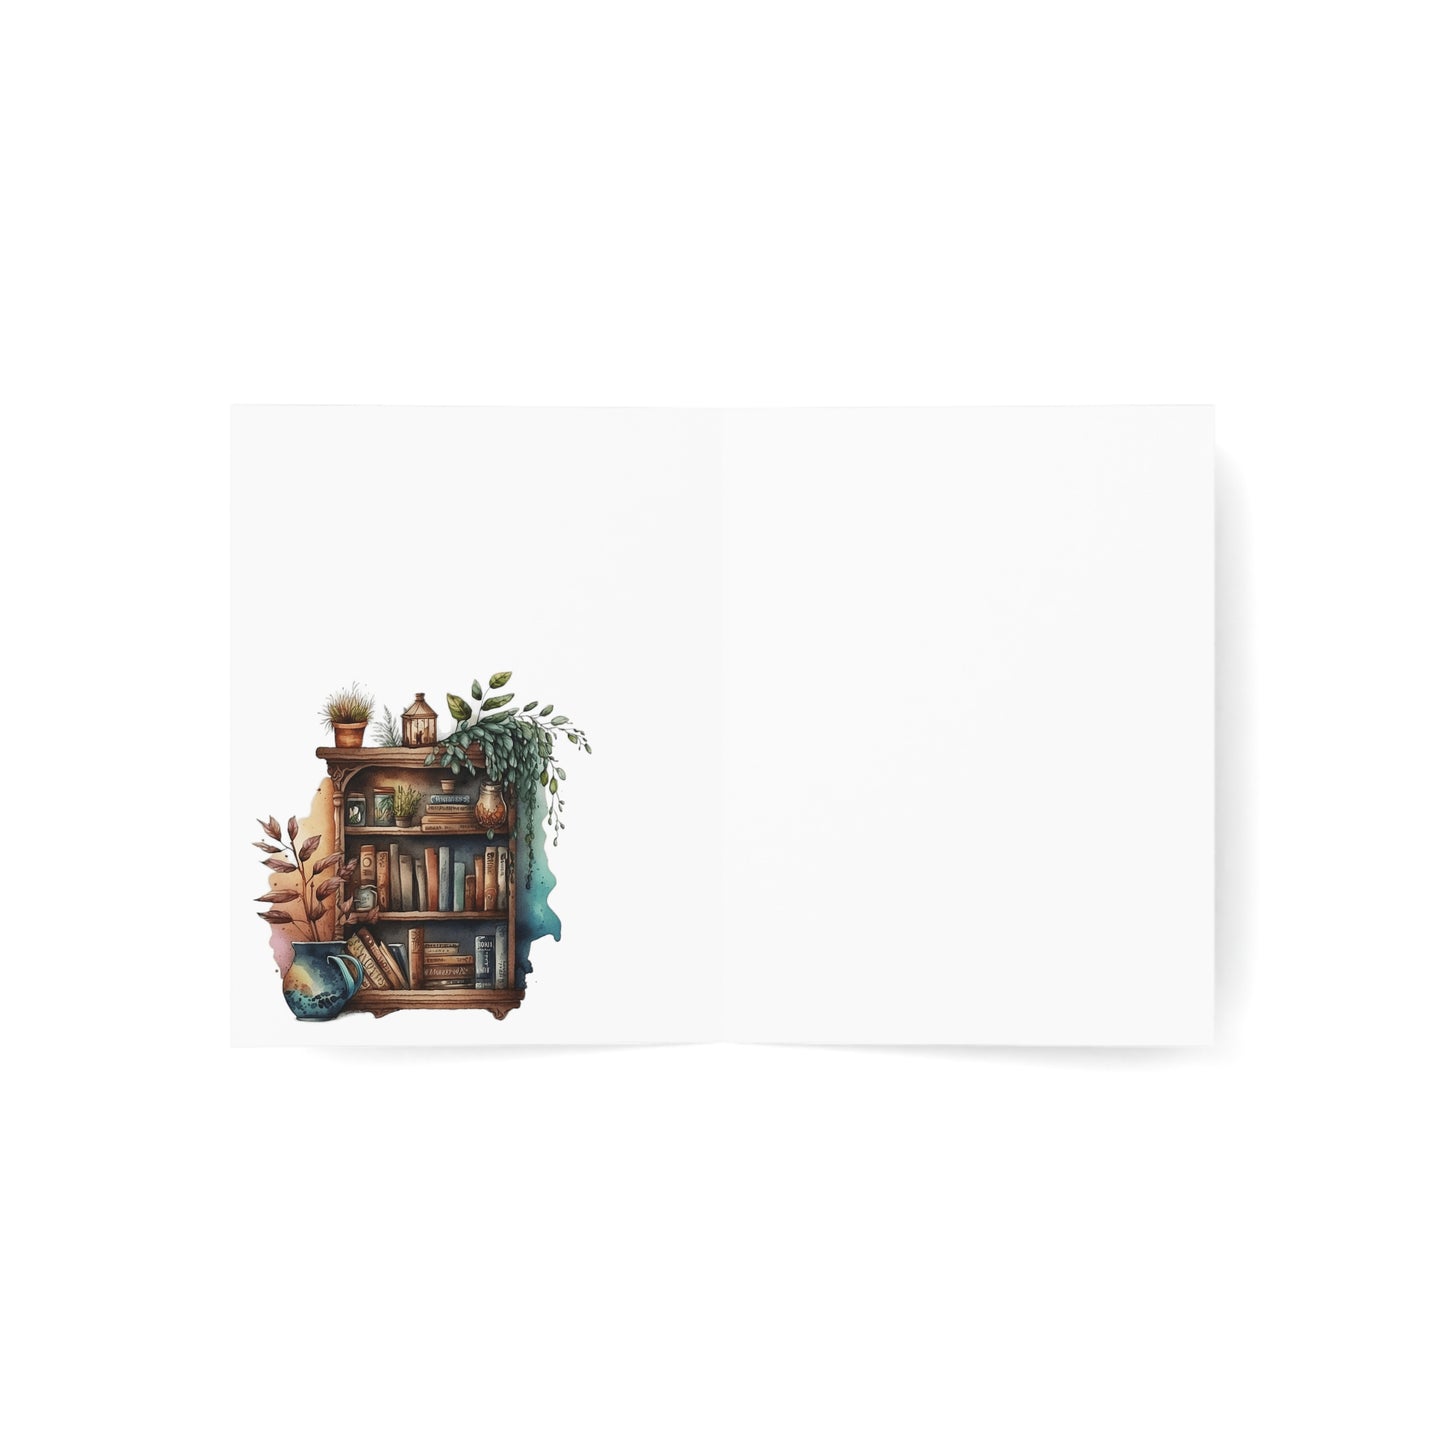 Greeting Cards (1, 10, 30, and 50pcs) “I read books and I know things. That’s what I do.”